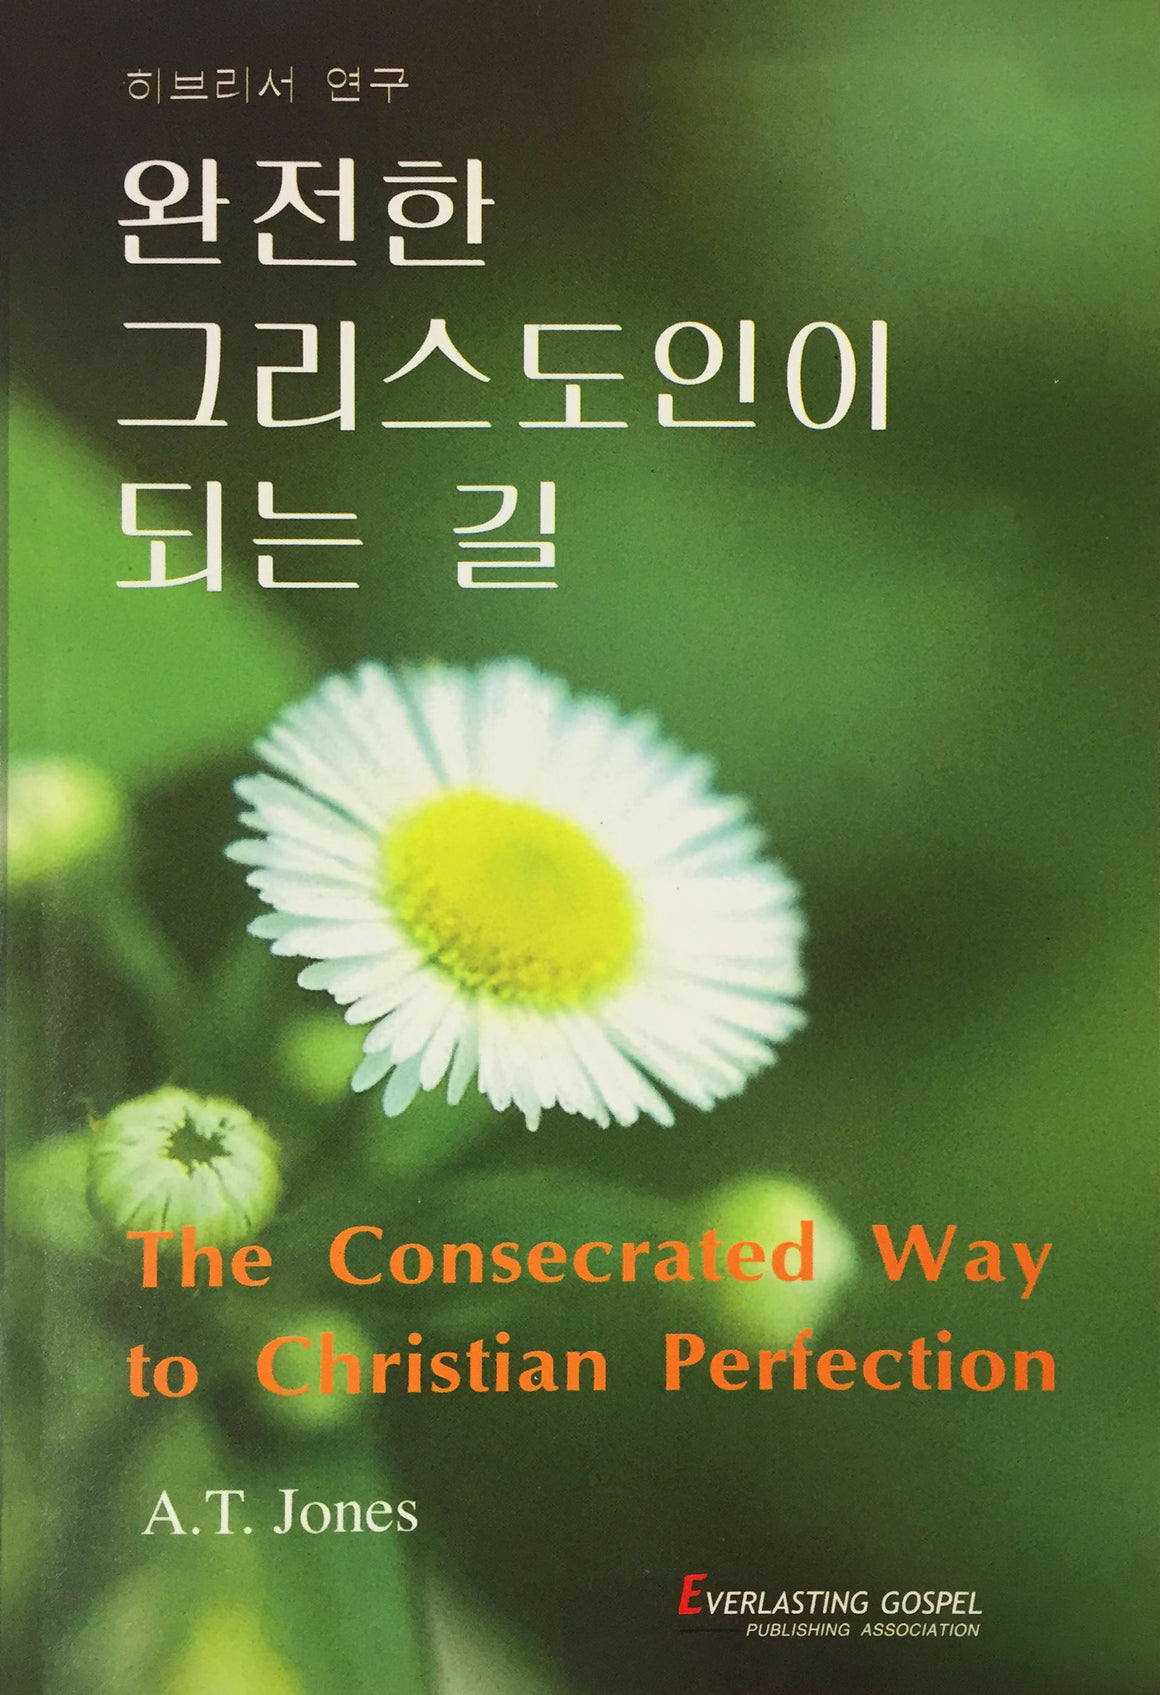 The Consecrated Way to Christian Perfection (Korean: 완전한 그리스도인이 되는 길)